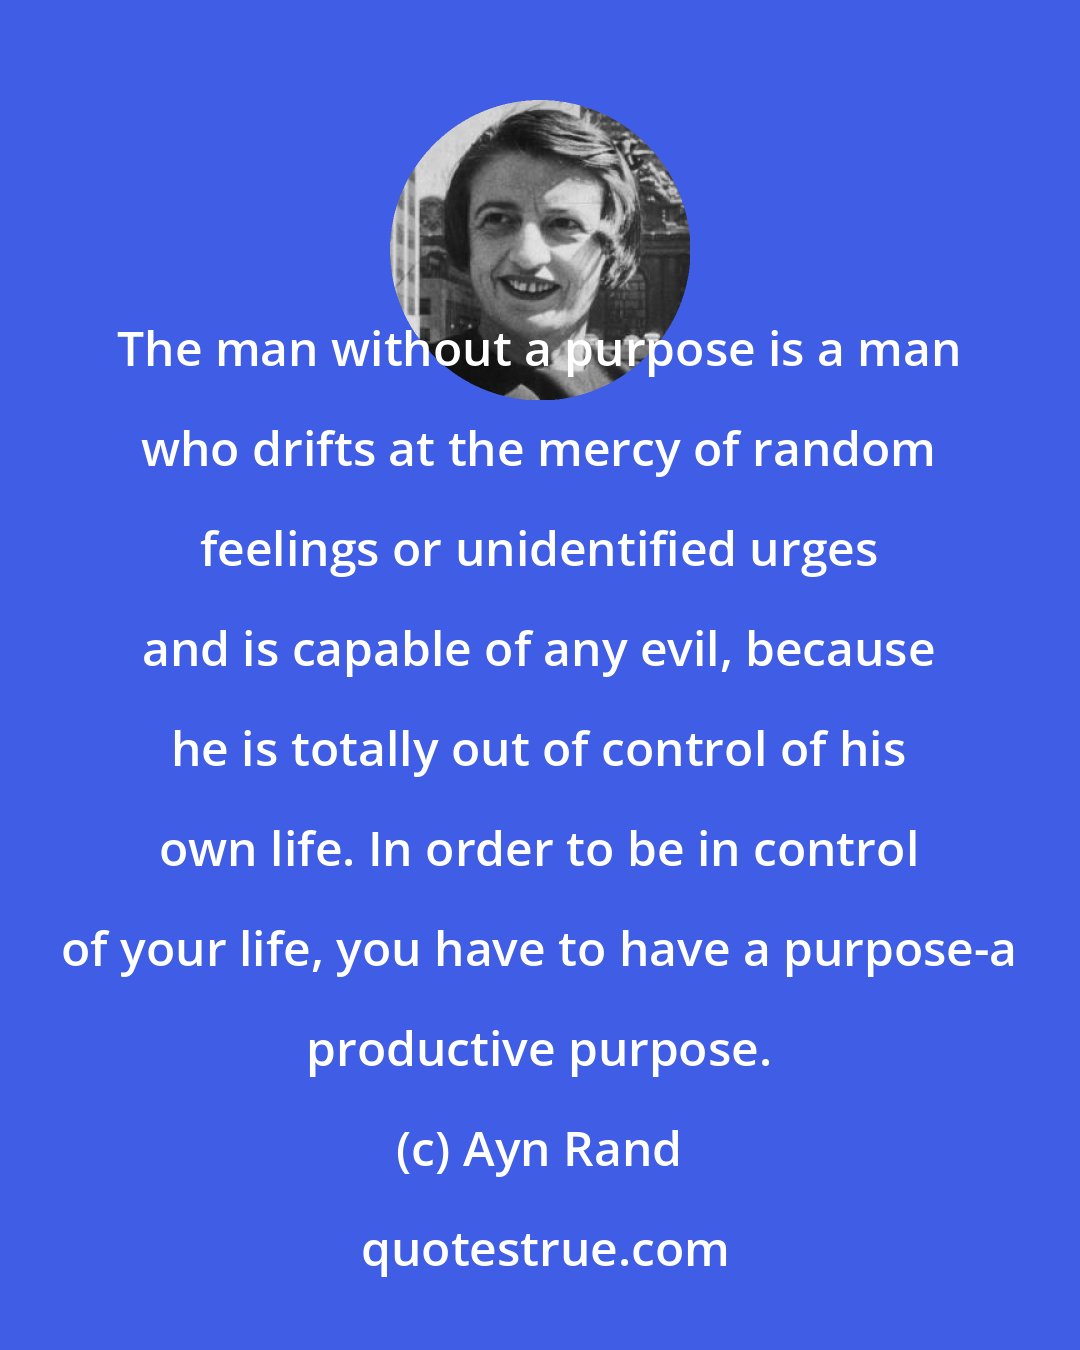 Ayn Rand: The man without a purpose is a man who drifts at the mercy of random feelings or unidentified urges and is capable of any evil, because he is totally out of control of his own life. In order to be in control of your life, you have to have a purpose-a productive purpose.